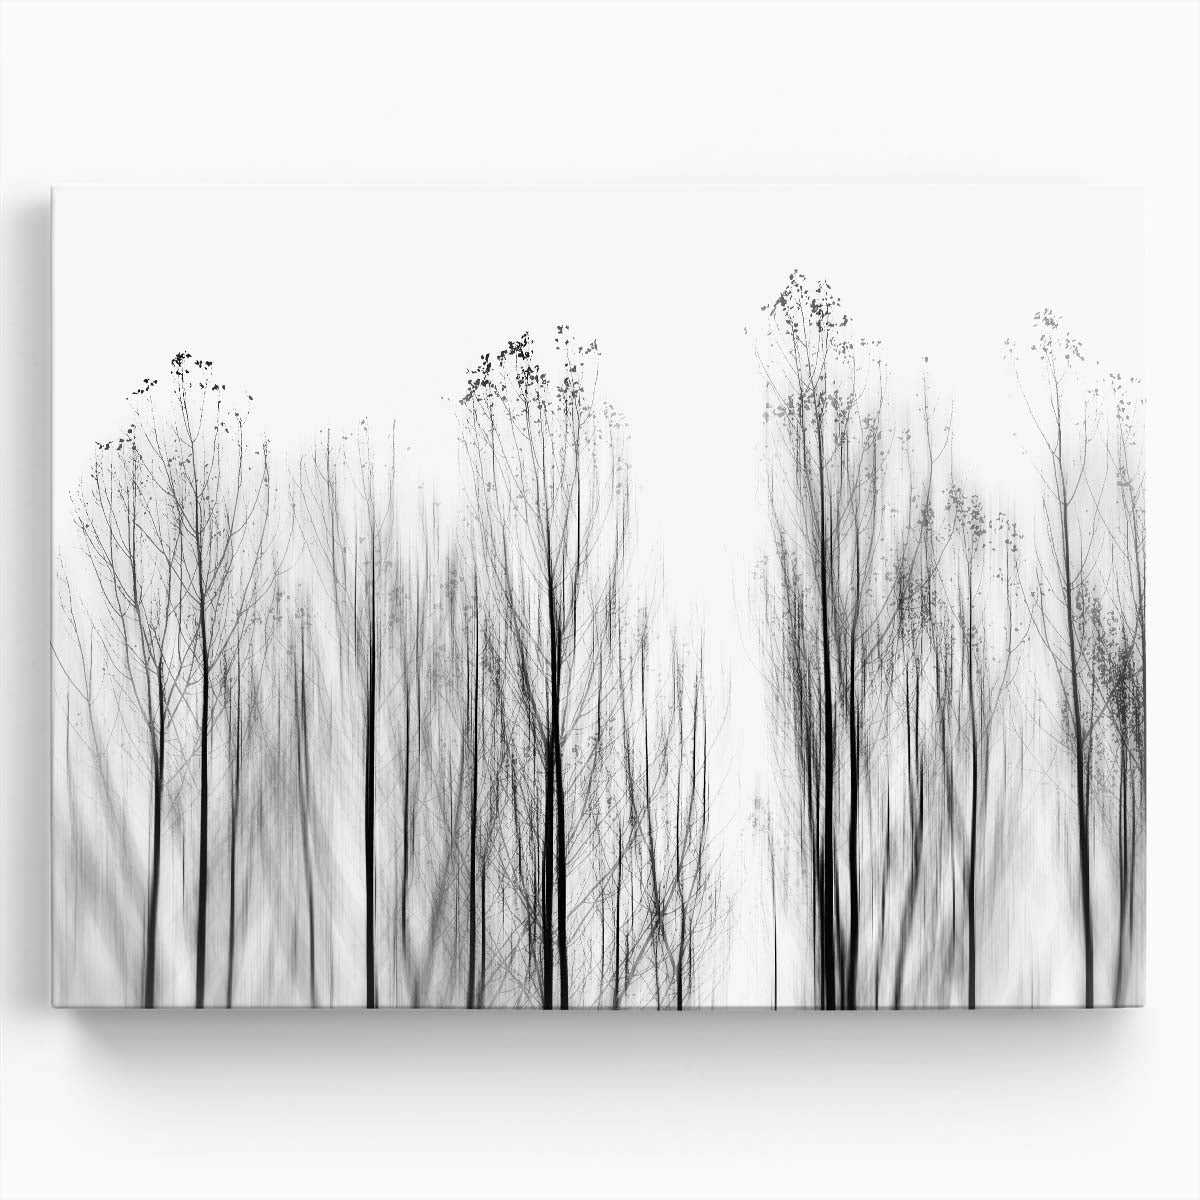 Monochrome Portugal Landscape Trees Wall Art by Luxuriance Designs. Made in USA.